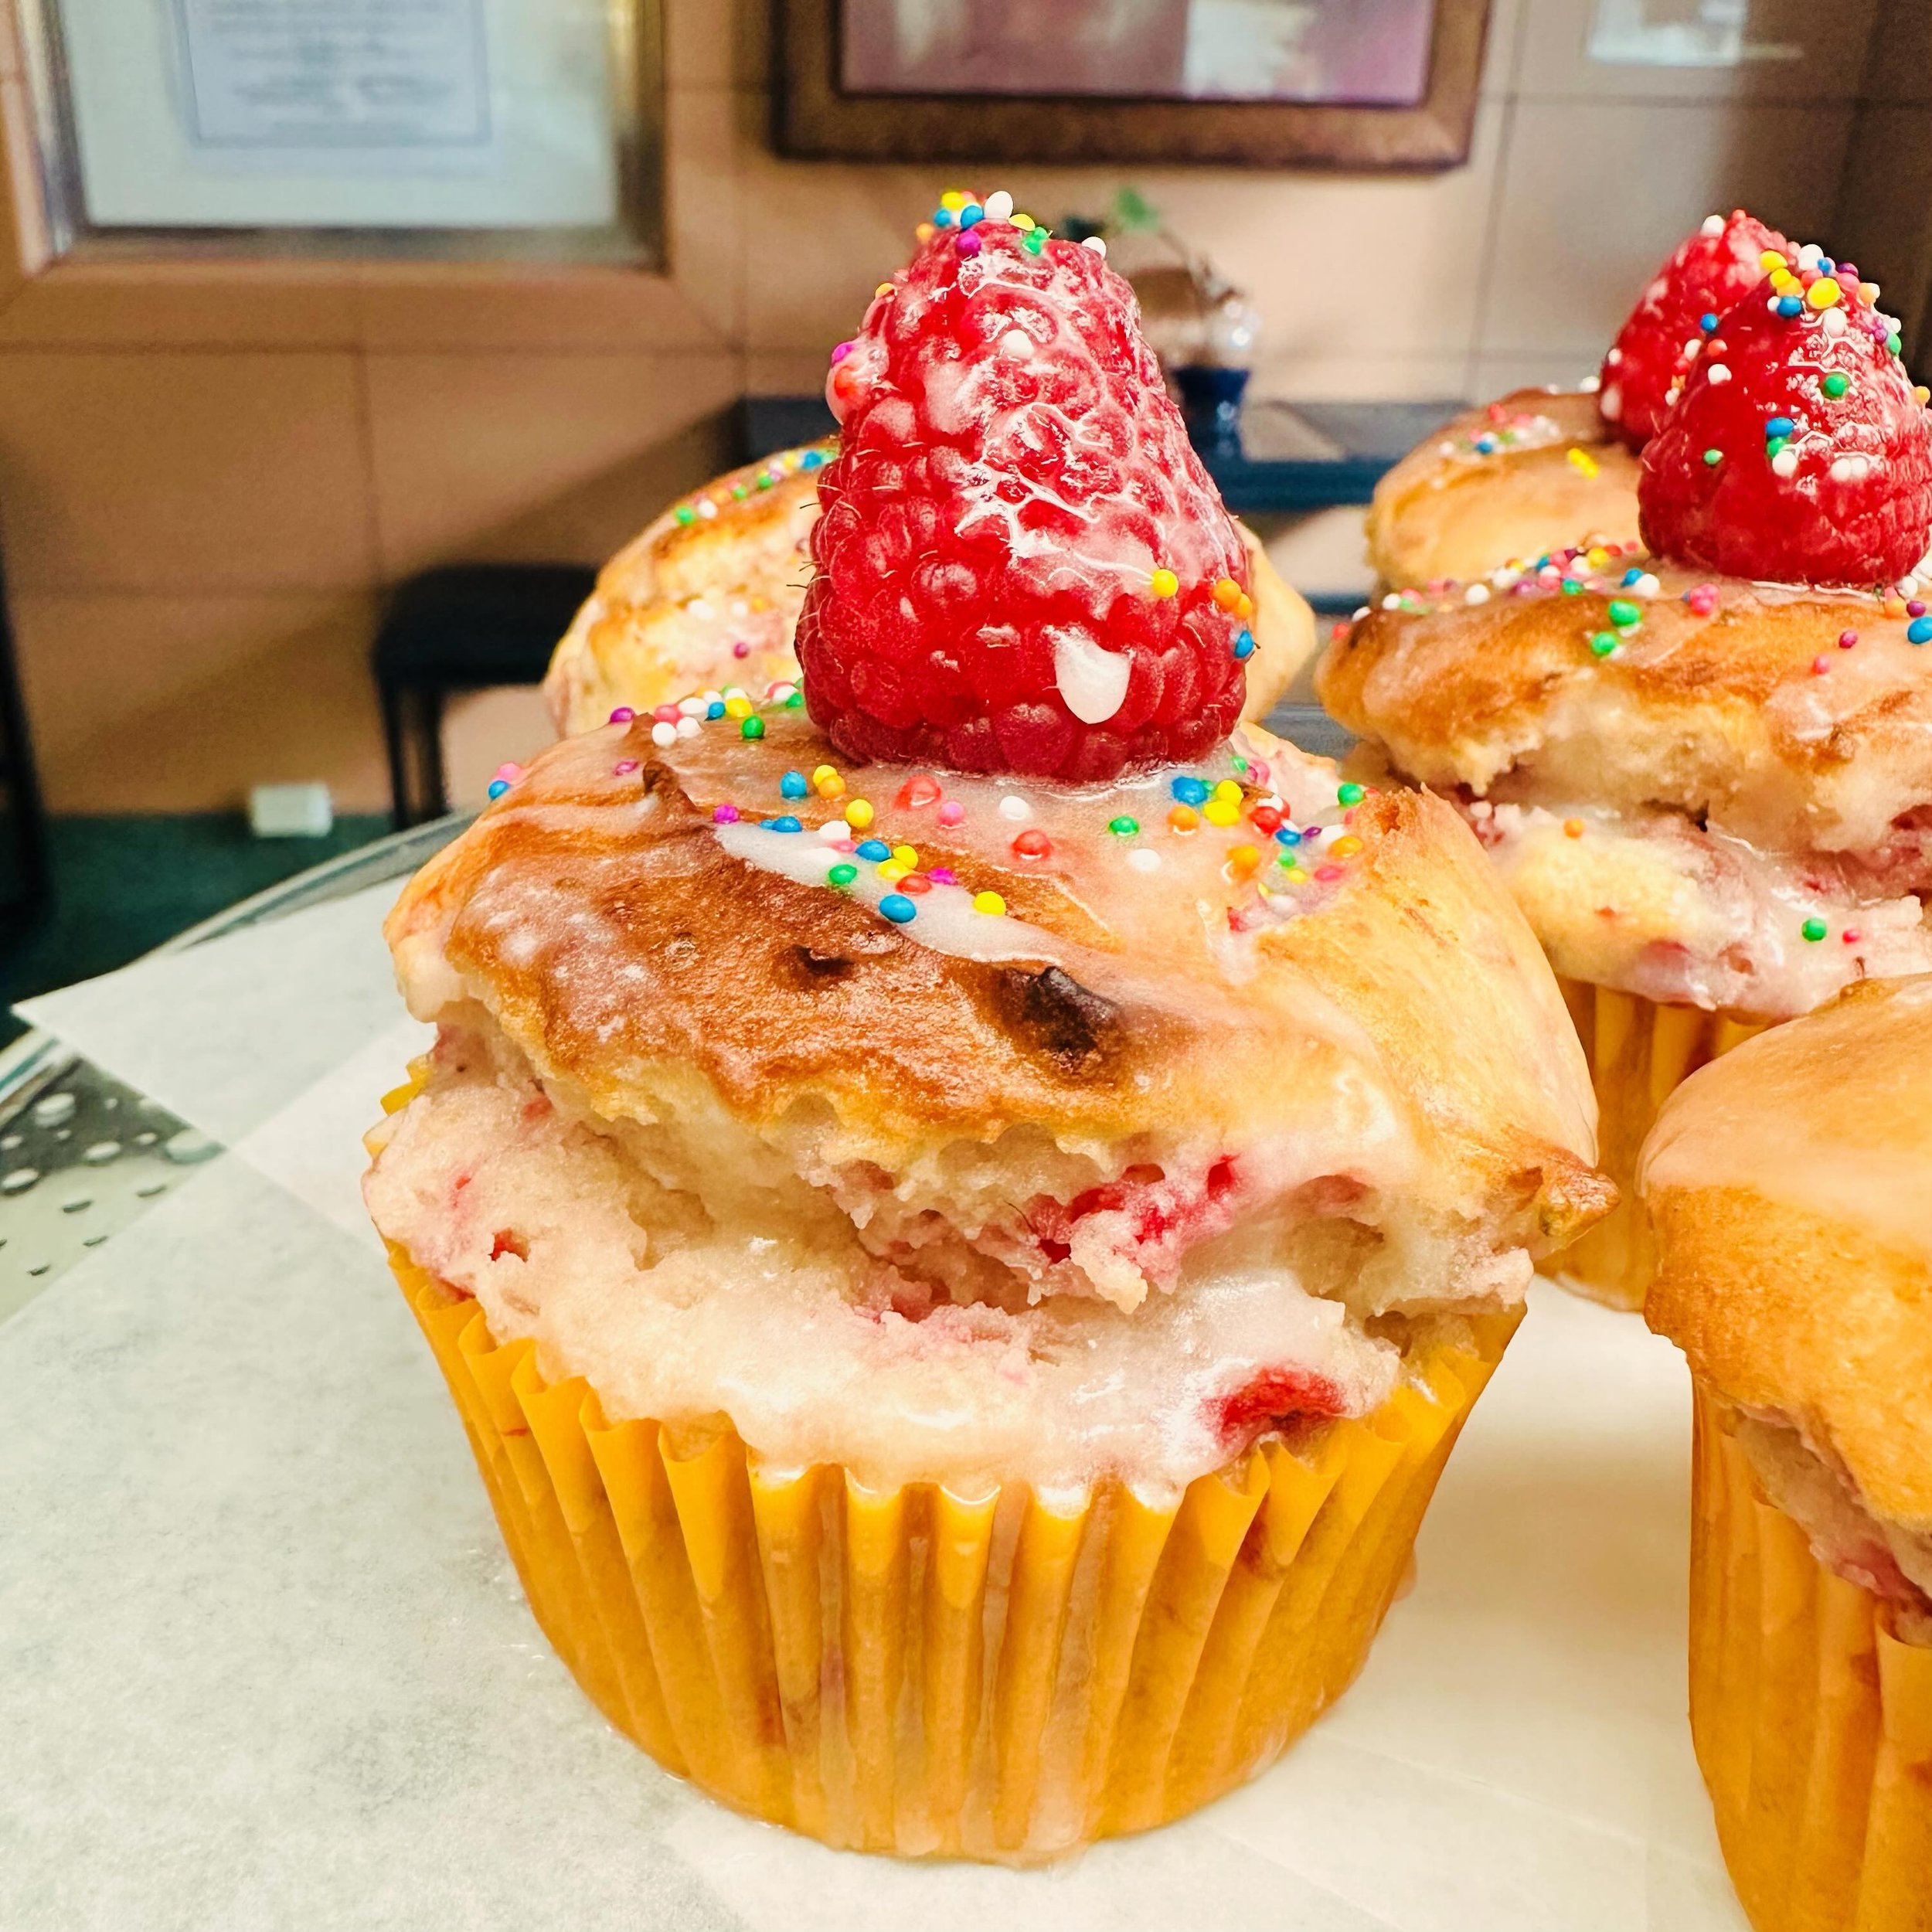 Good Morning Cran-Razzz!! What chew know bout Monday?!! Happy Muffins. Happy Everything. #downtownmedford #feedhangryteens #getyourmuffinon #luncheonette #whattoeatinsouthernoregon #foodiefinds #happymonday